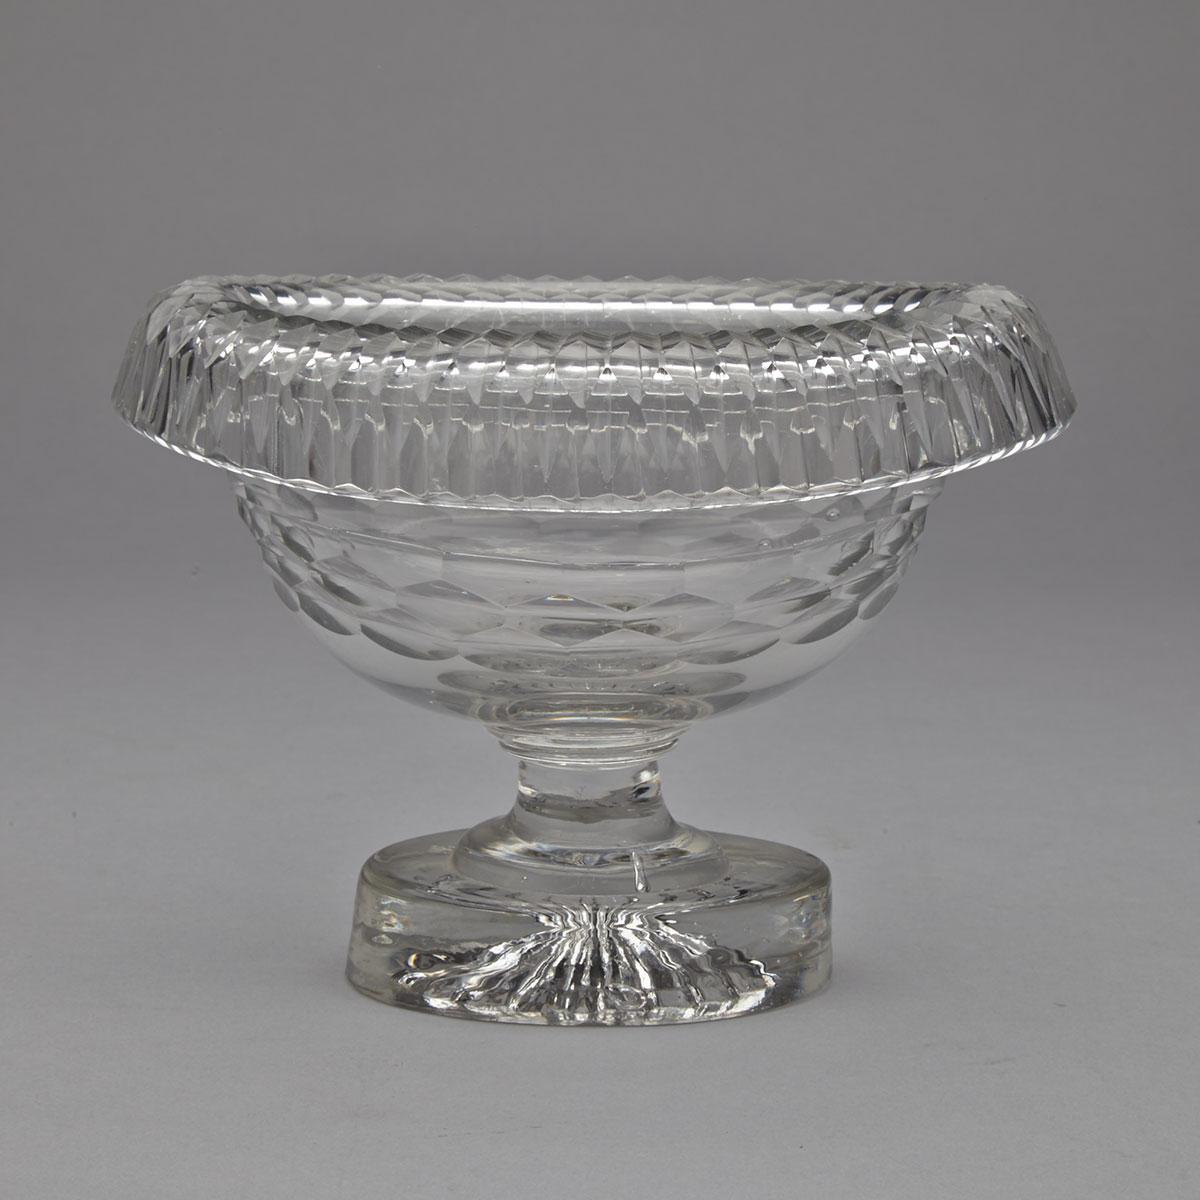 Anglo-Irish Cut Glass Small Pedestal Footed Oval Bowl, c.1800